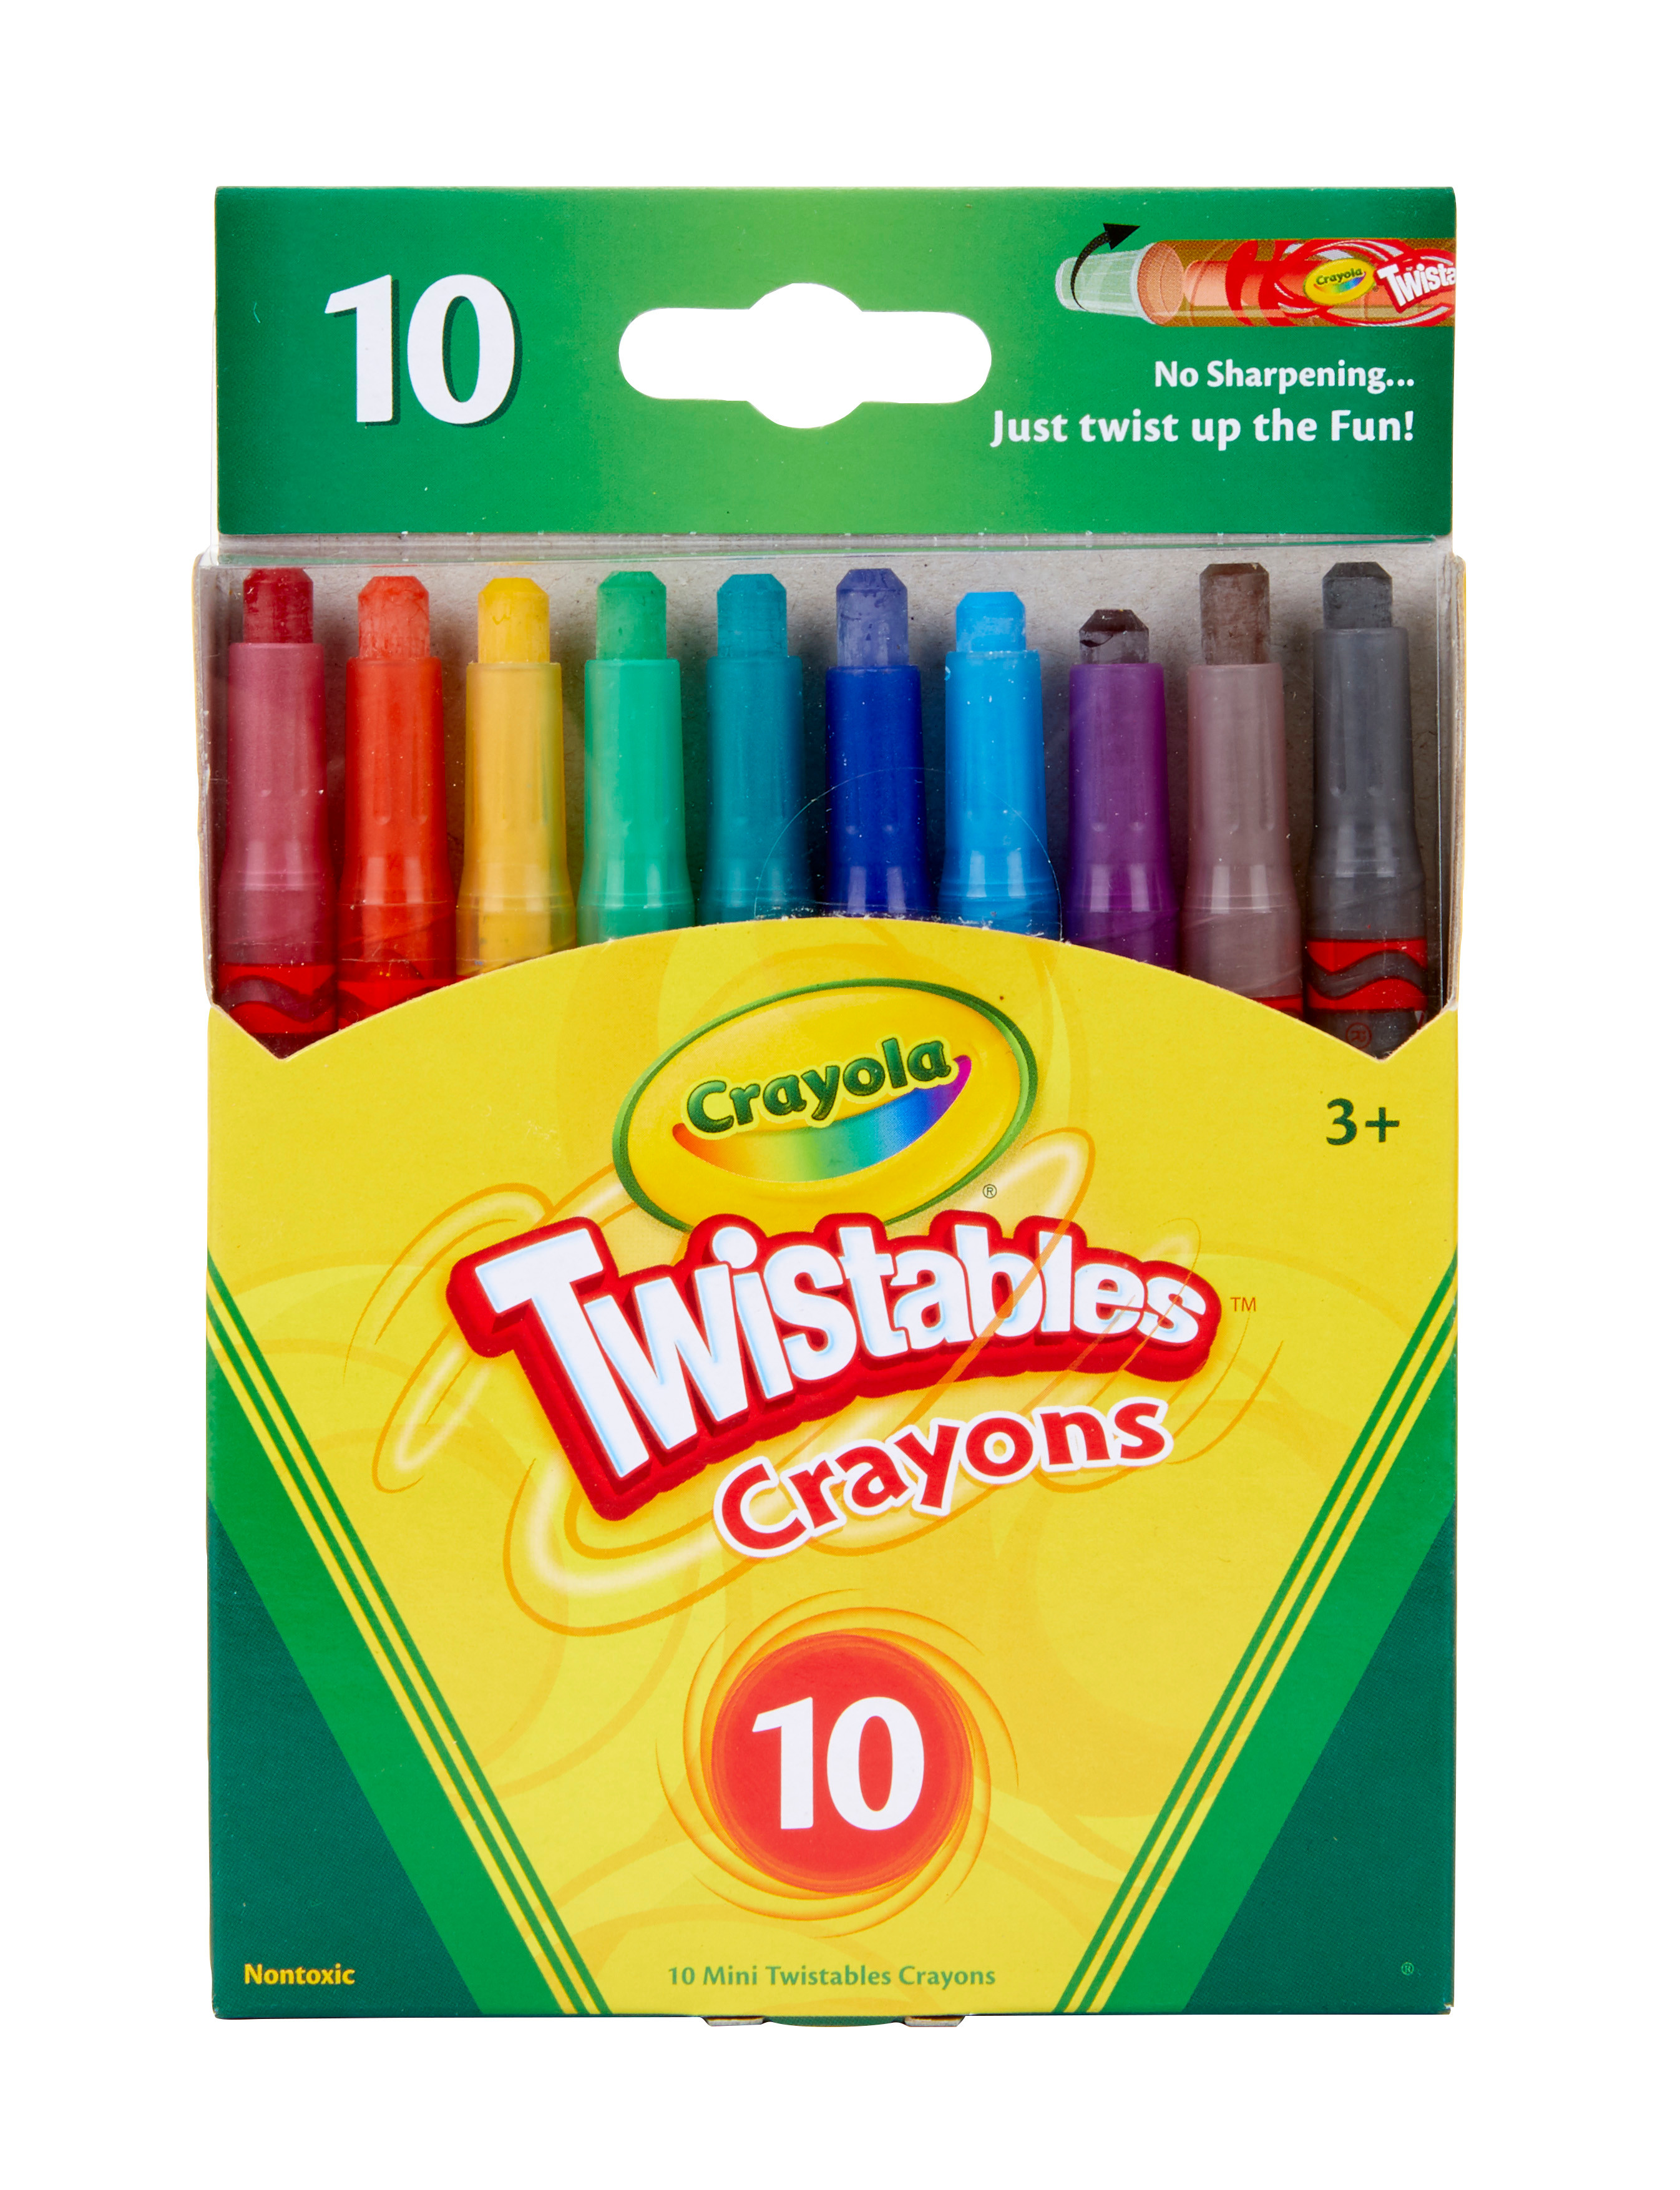 Crayola Mini-Twistables Crayons, 10 Count, Assorted Colors - image 1 of 6